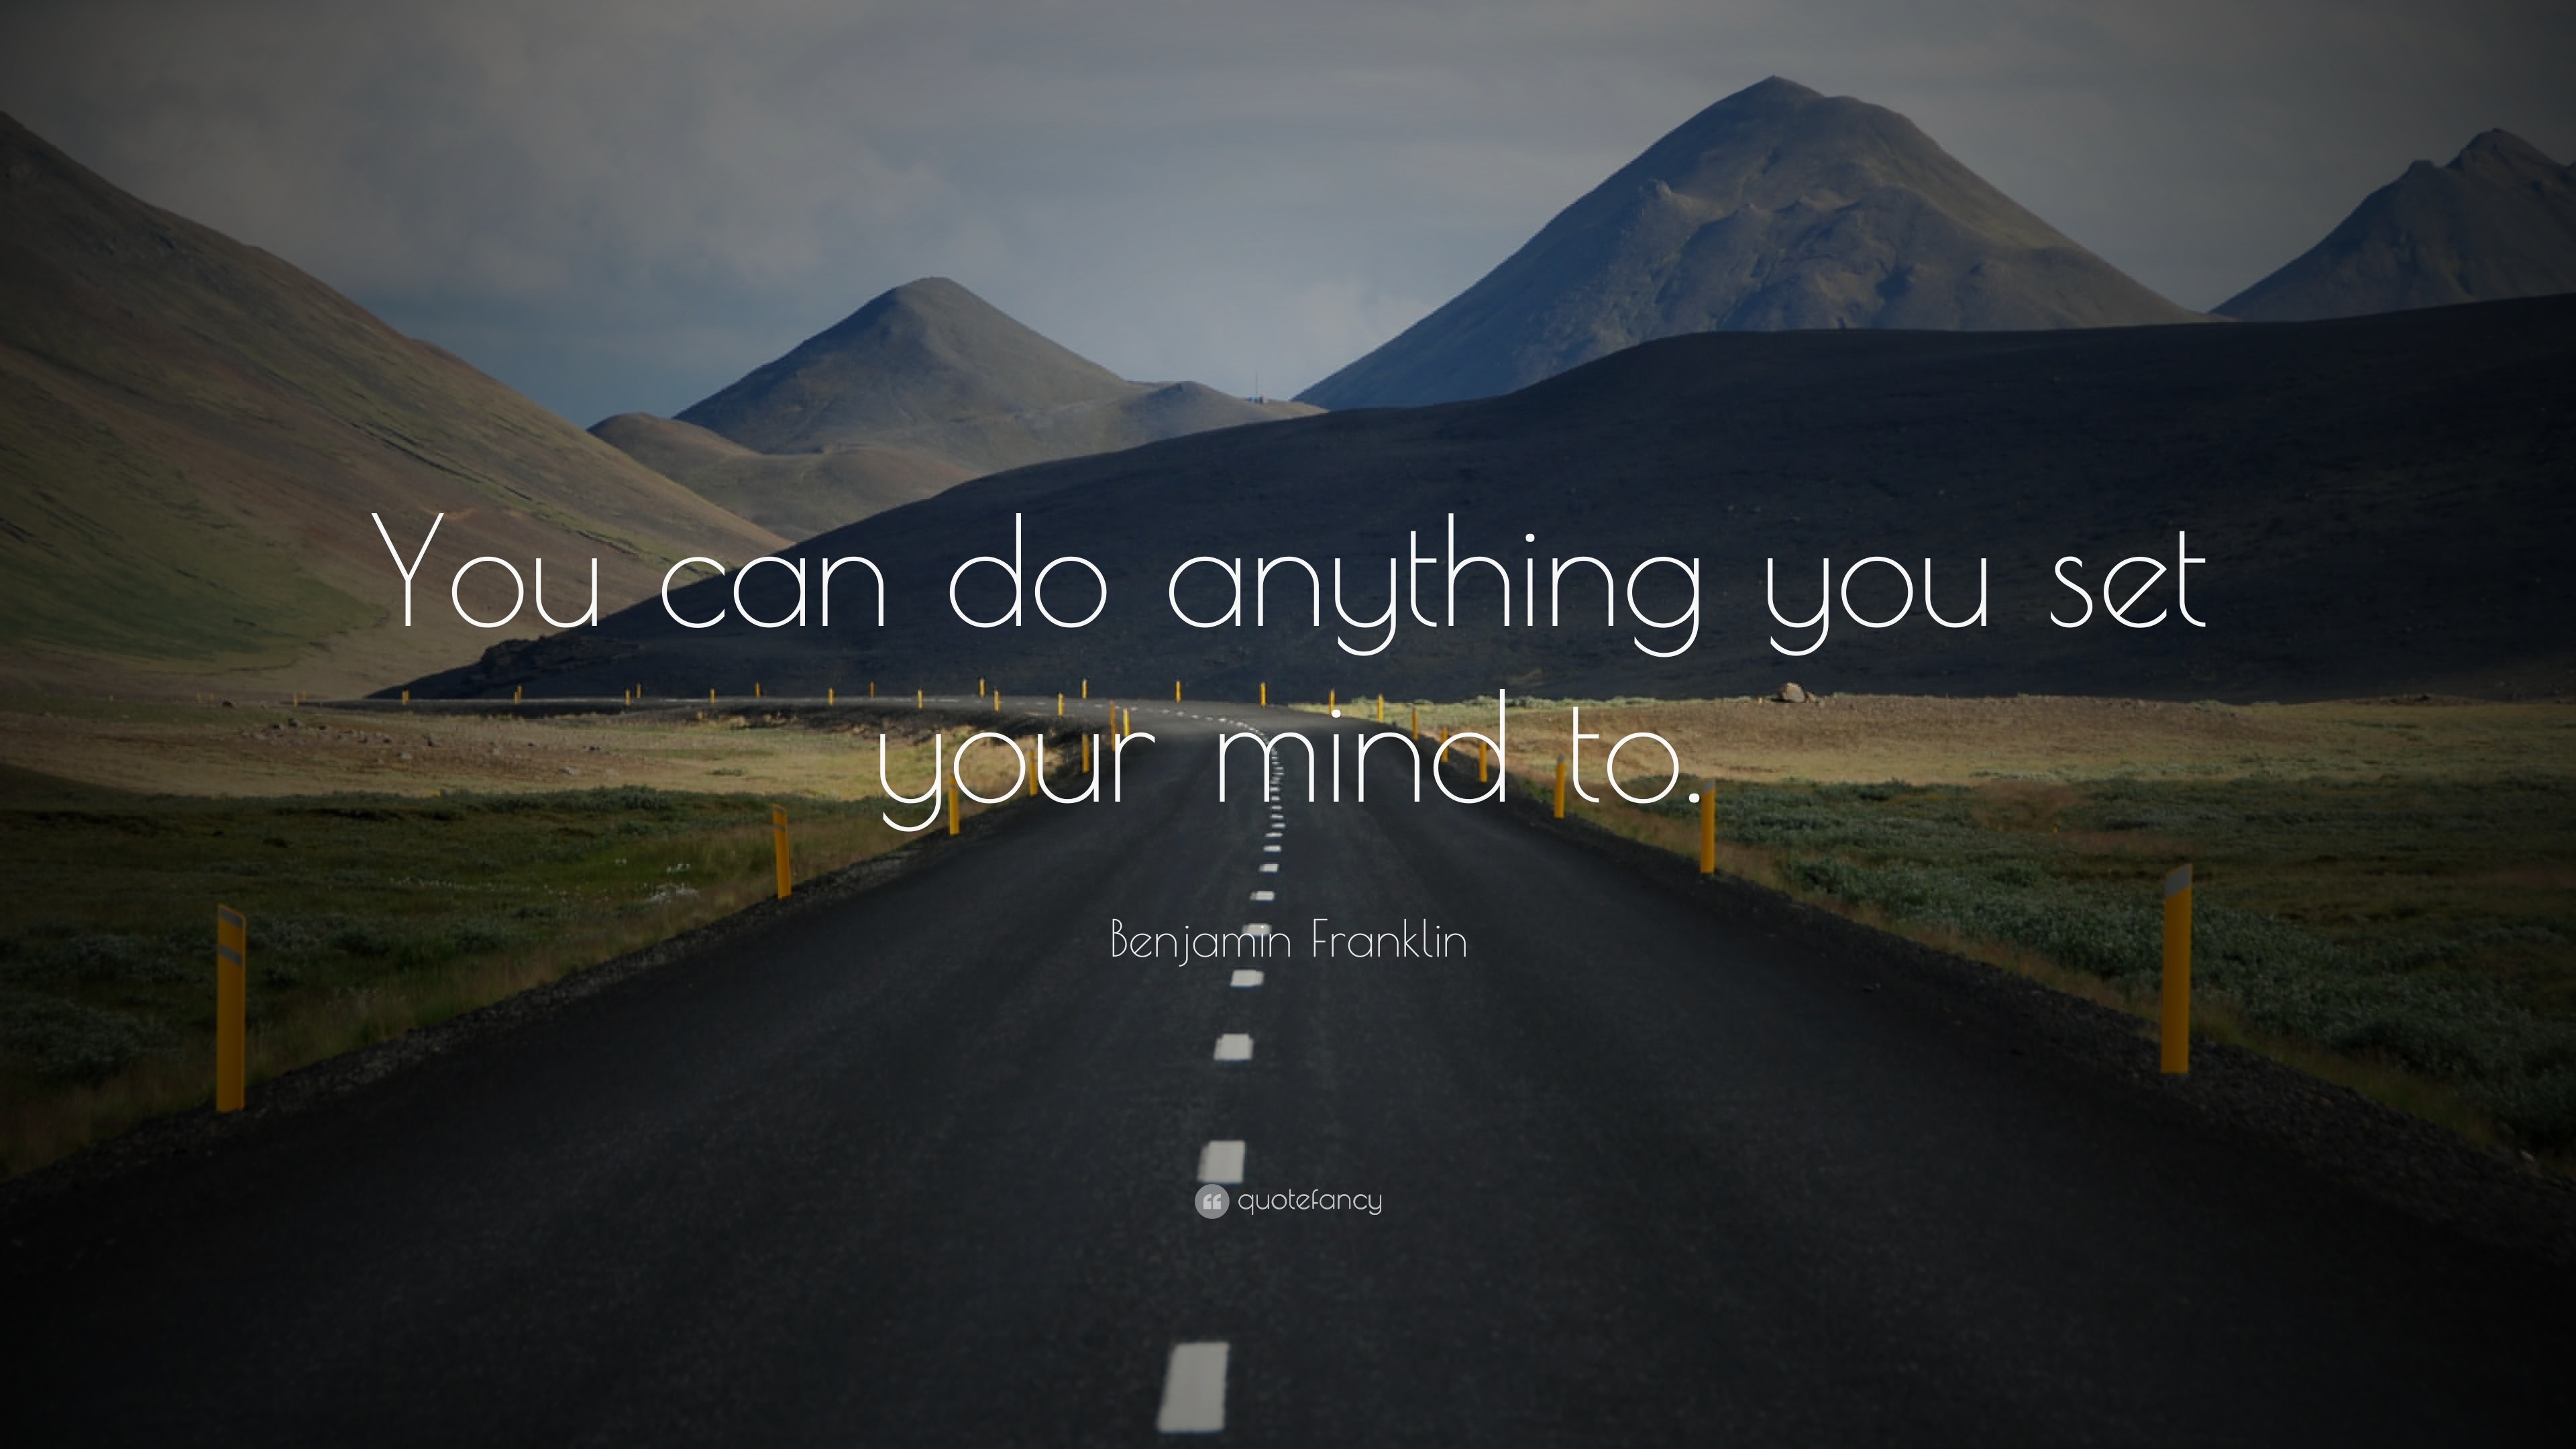 Benjamin Franklin Quote: “You can do anything you set your mind to